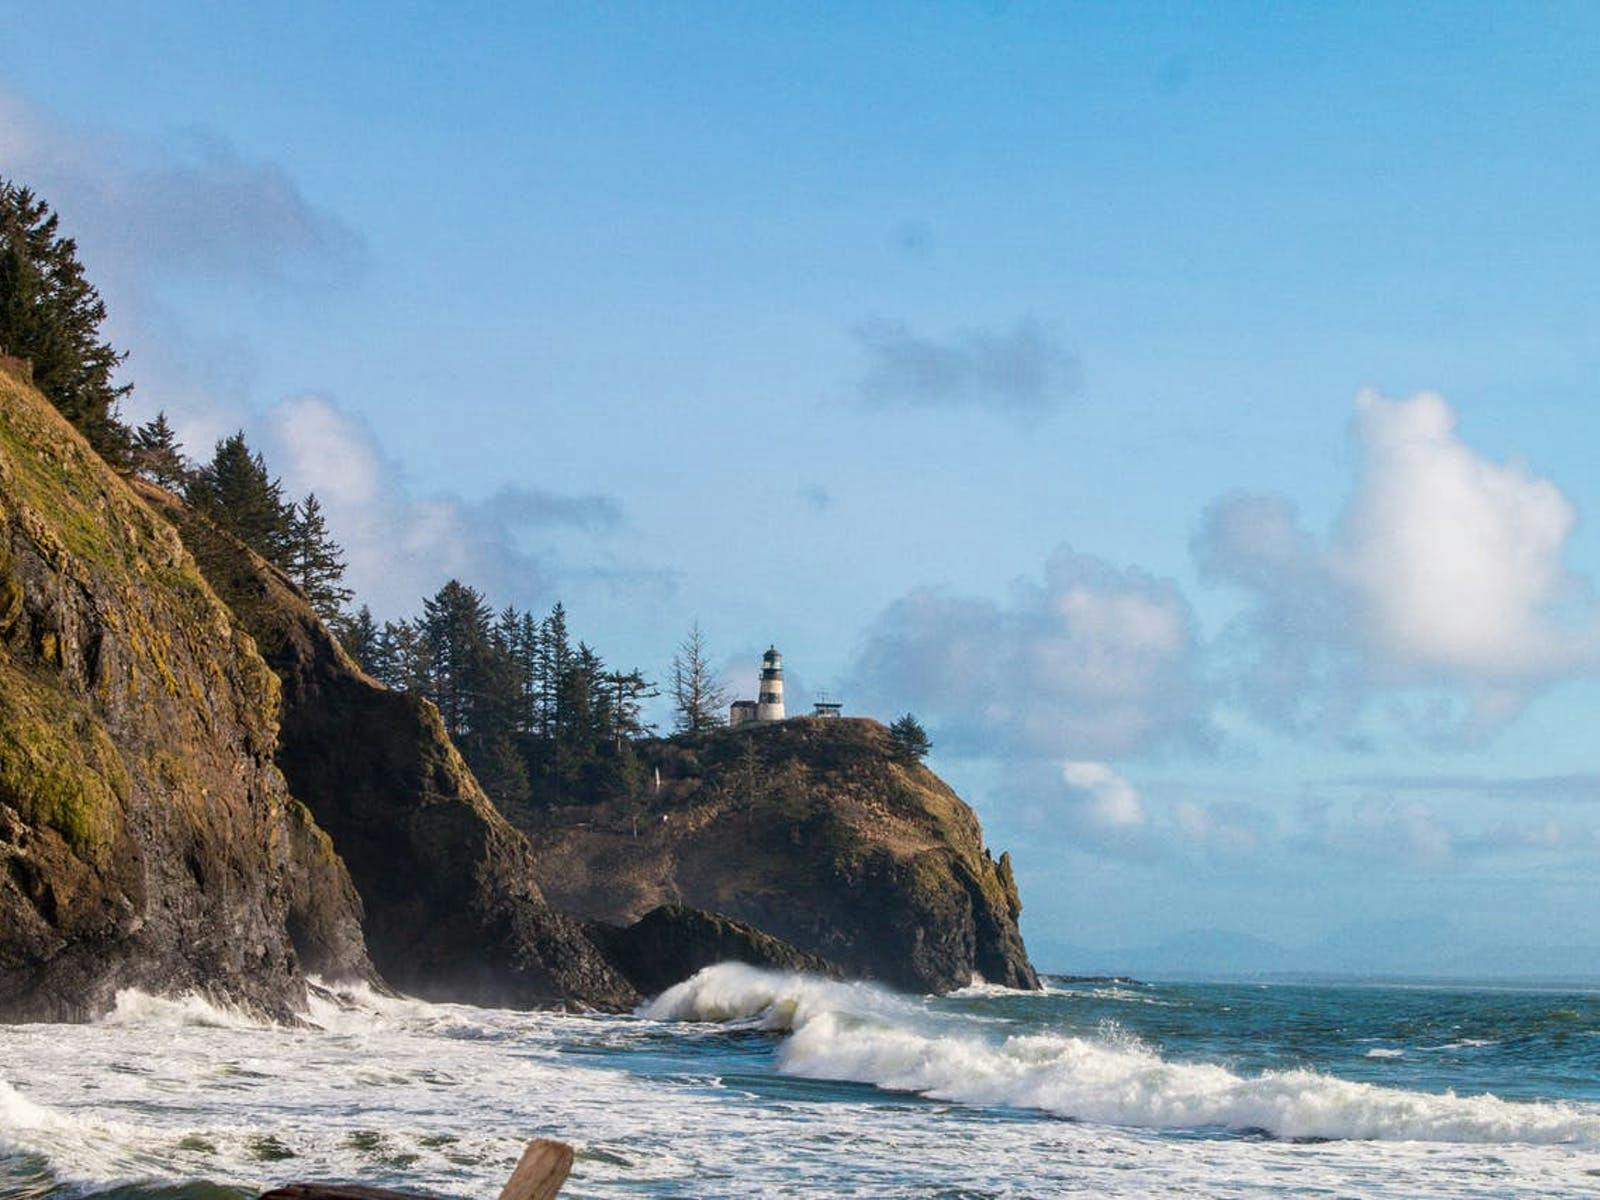 Lighthouse perched above the ocean as waves crash against the Washington coast